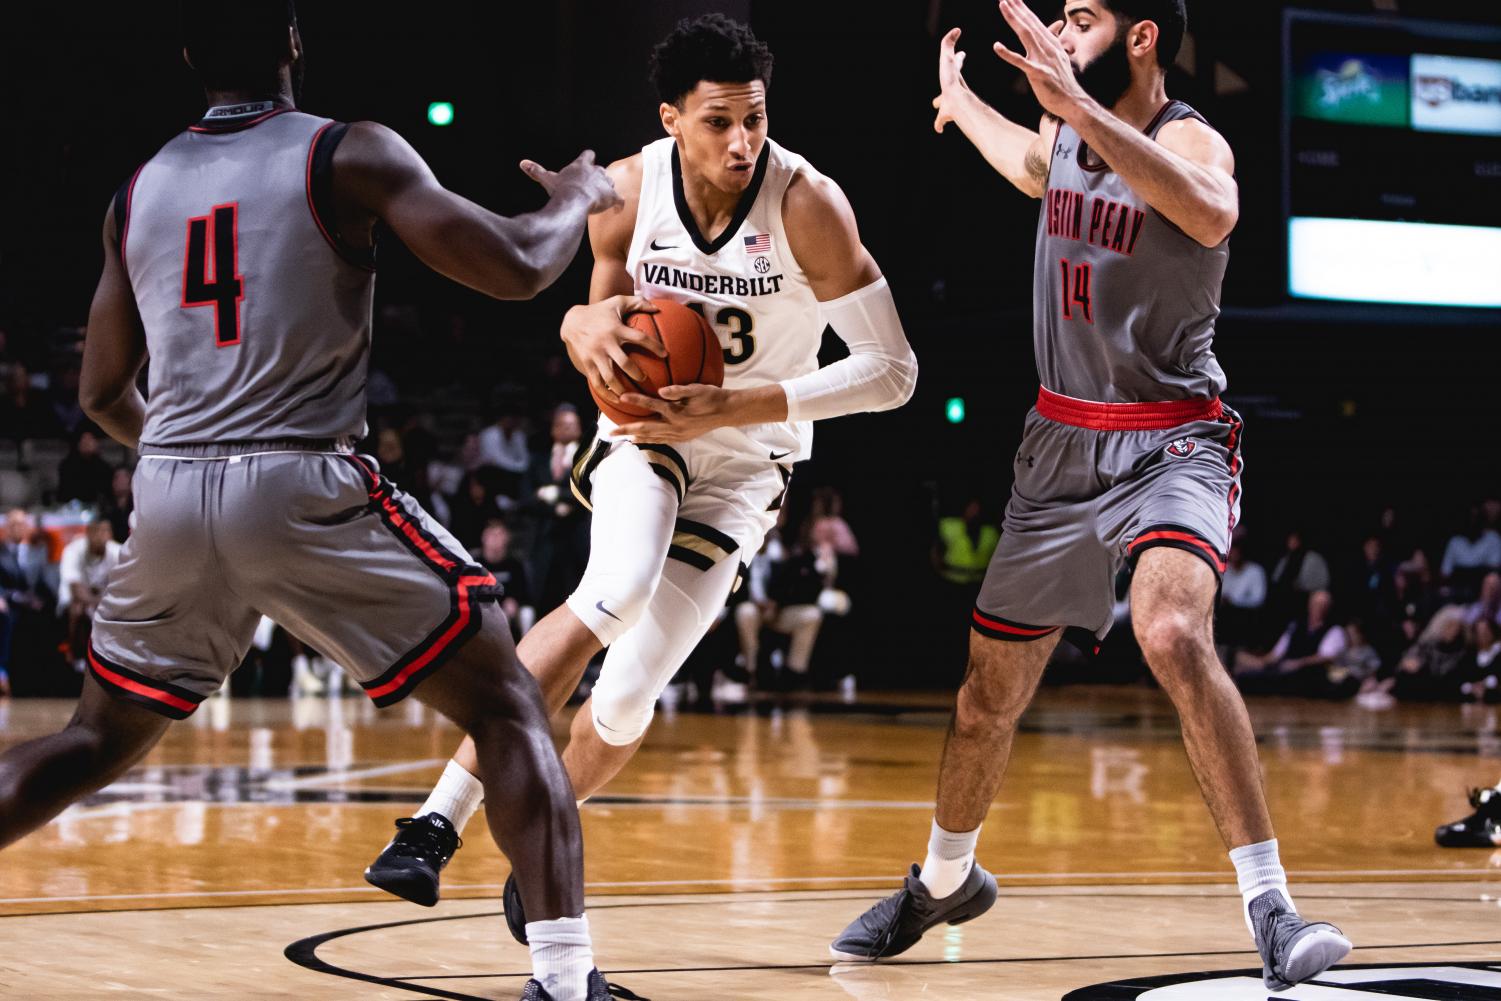 Matthew Moyer drives into the lane in Vanderbilts win over Austin Peay in November.